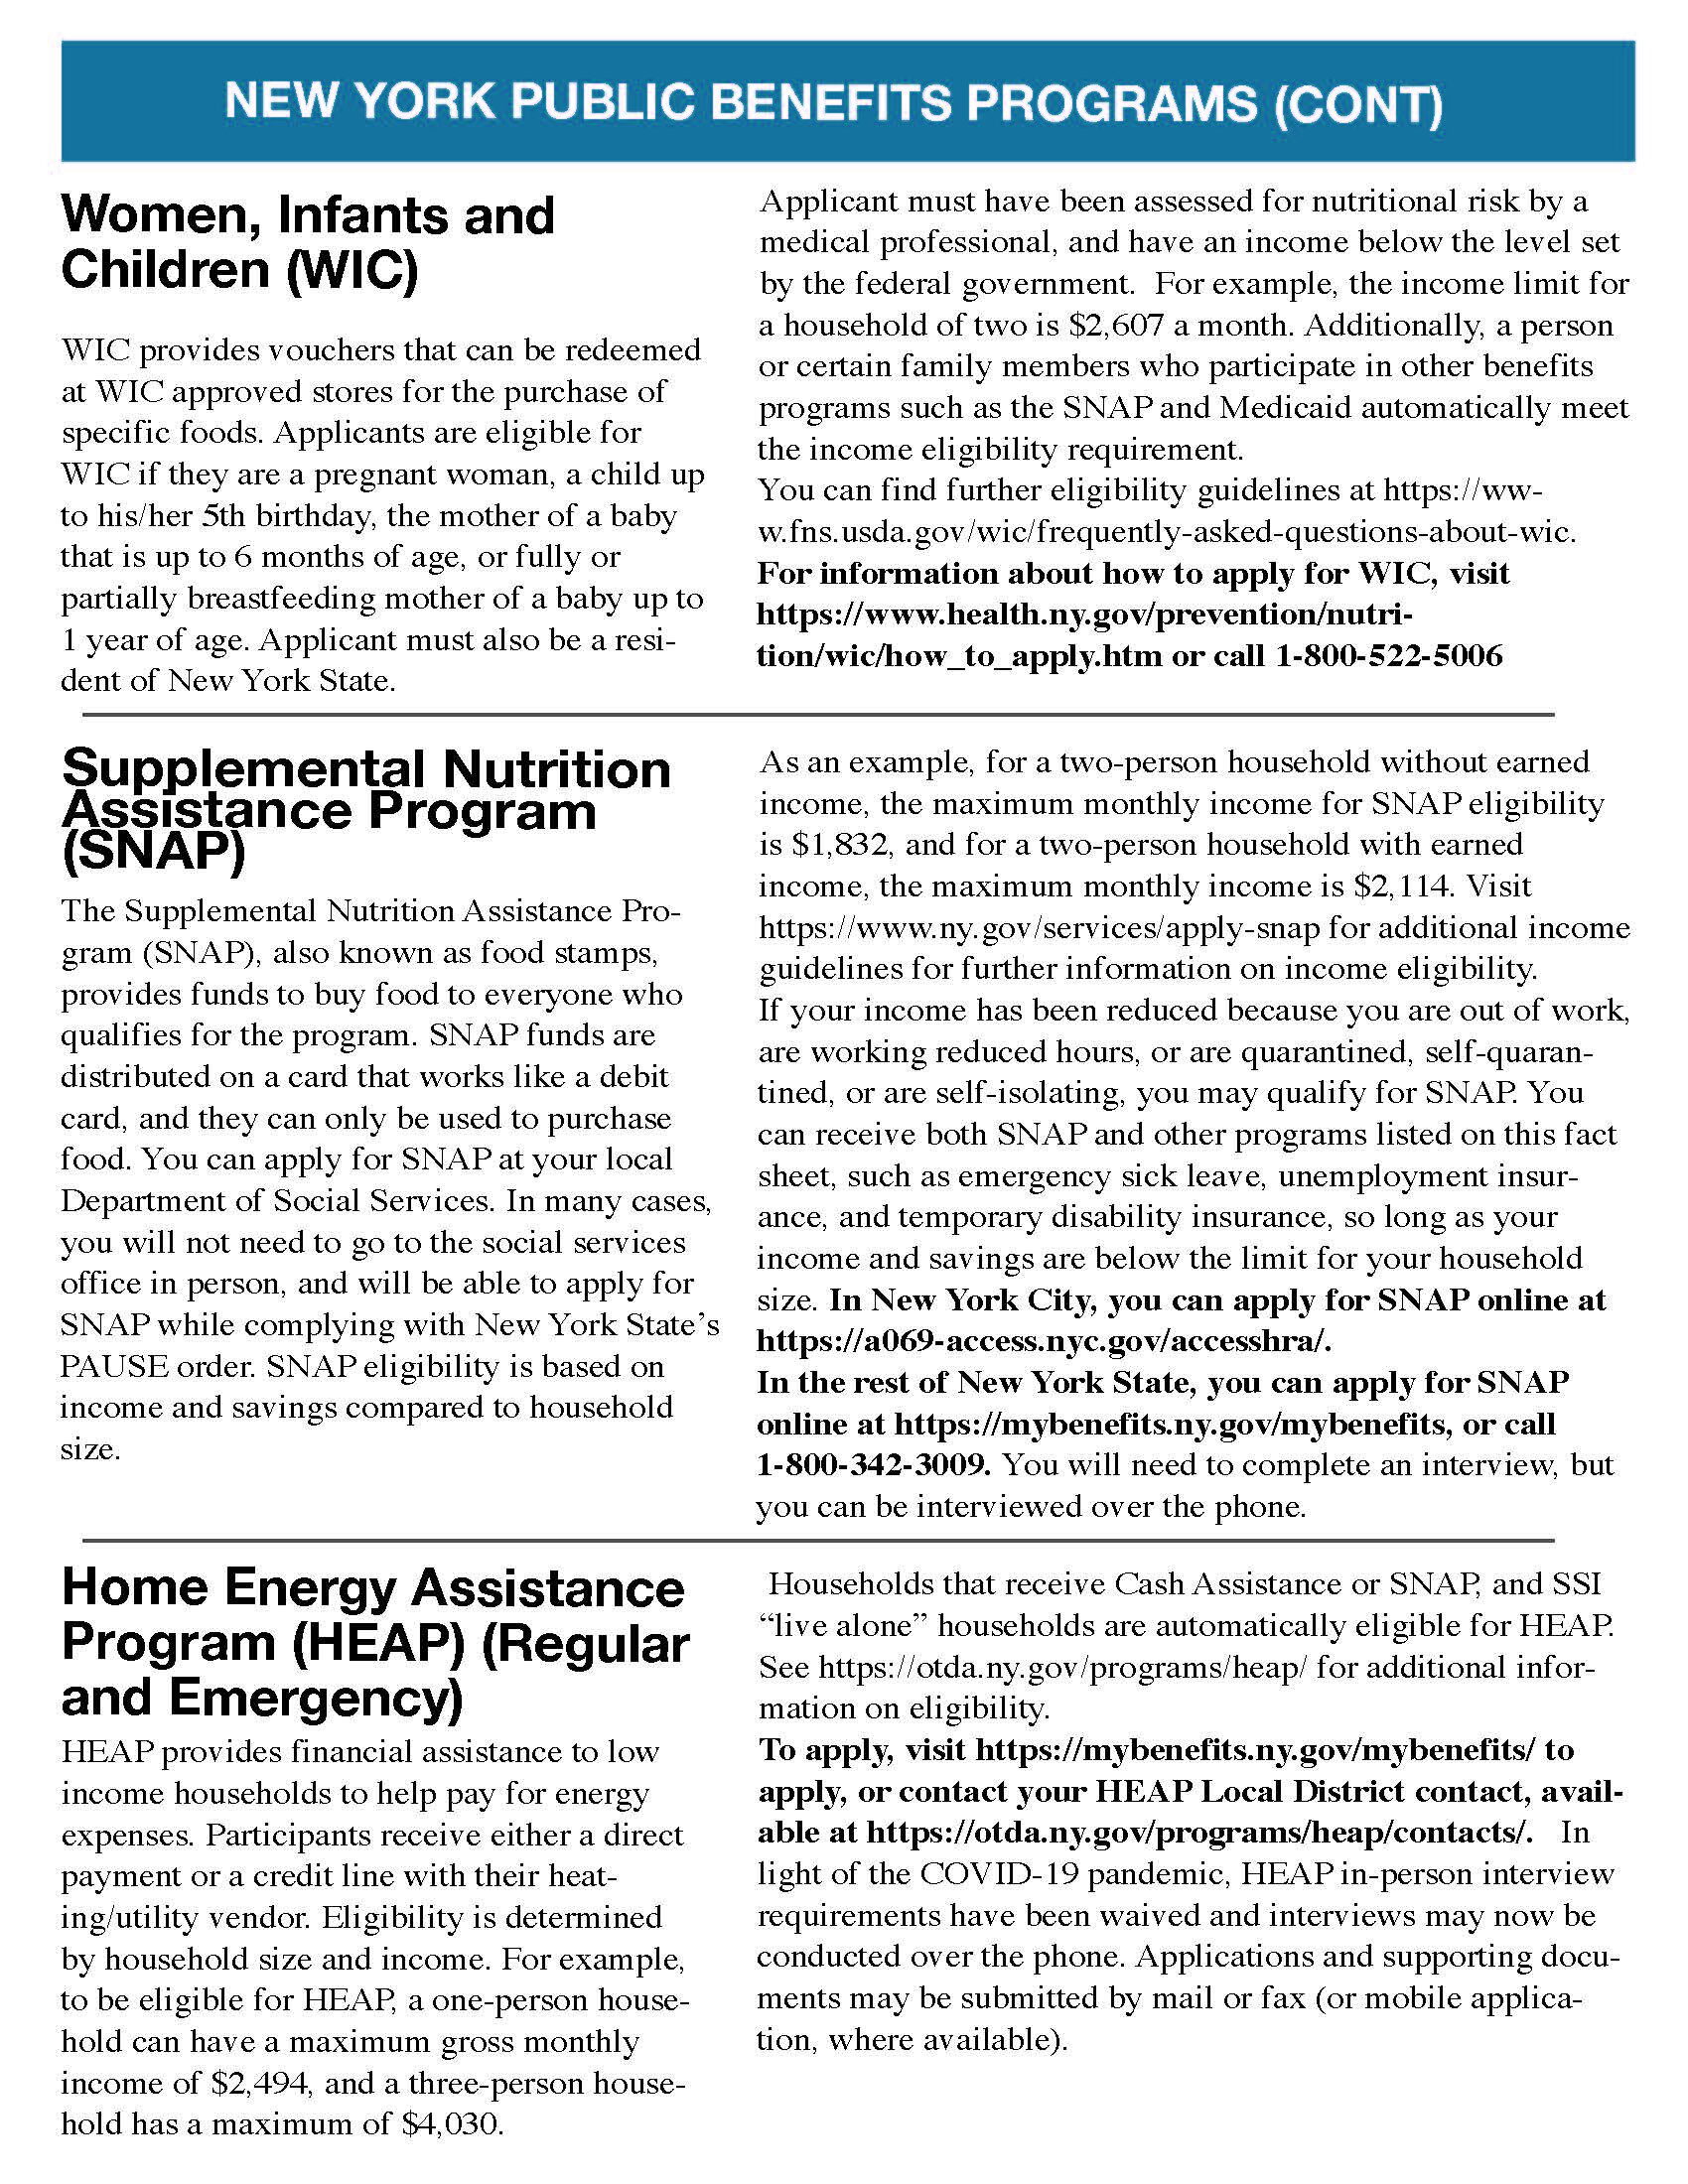 LWWTF Worker Protections+Benefits 3.27.2020_Page_4.jpg